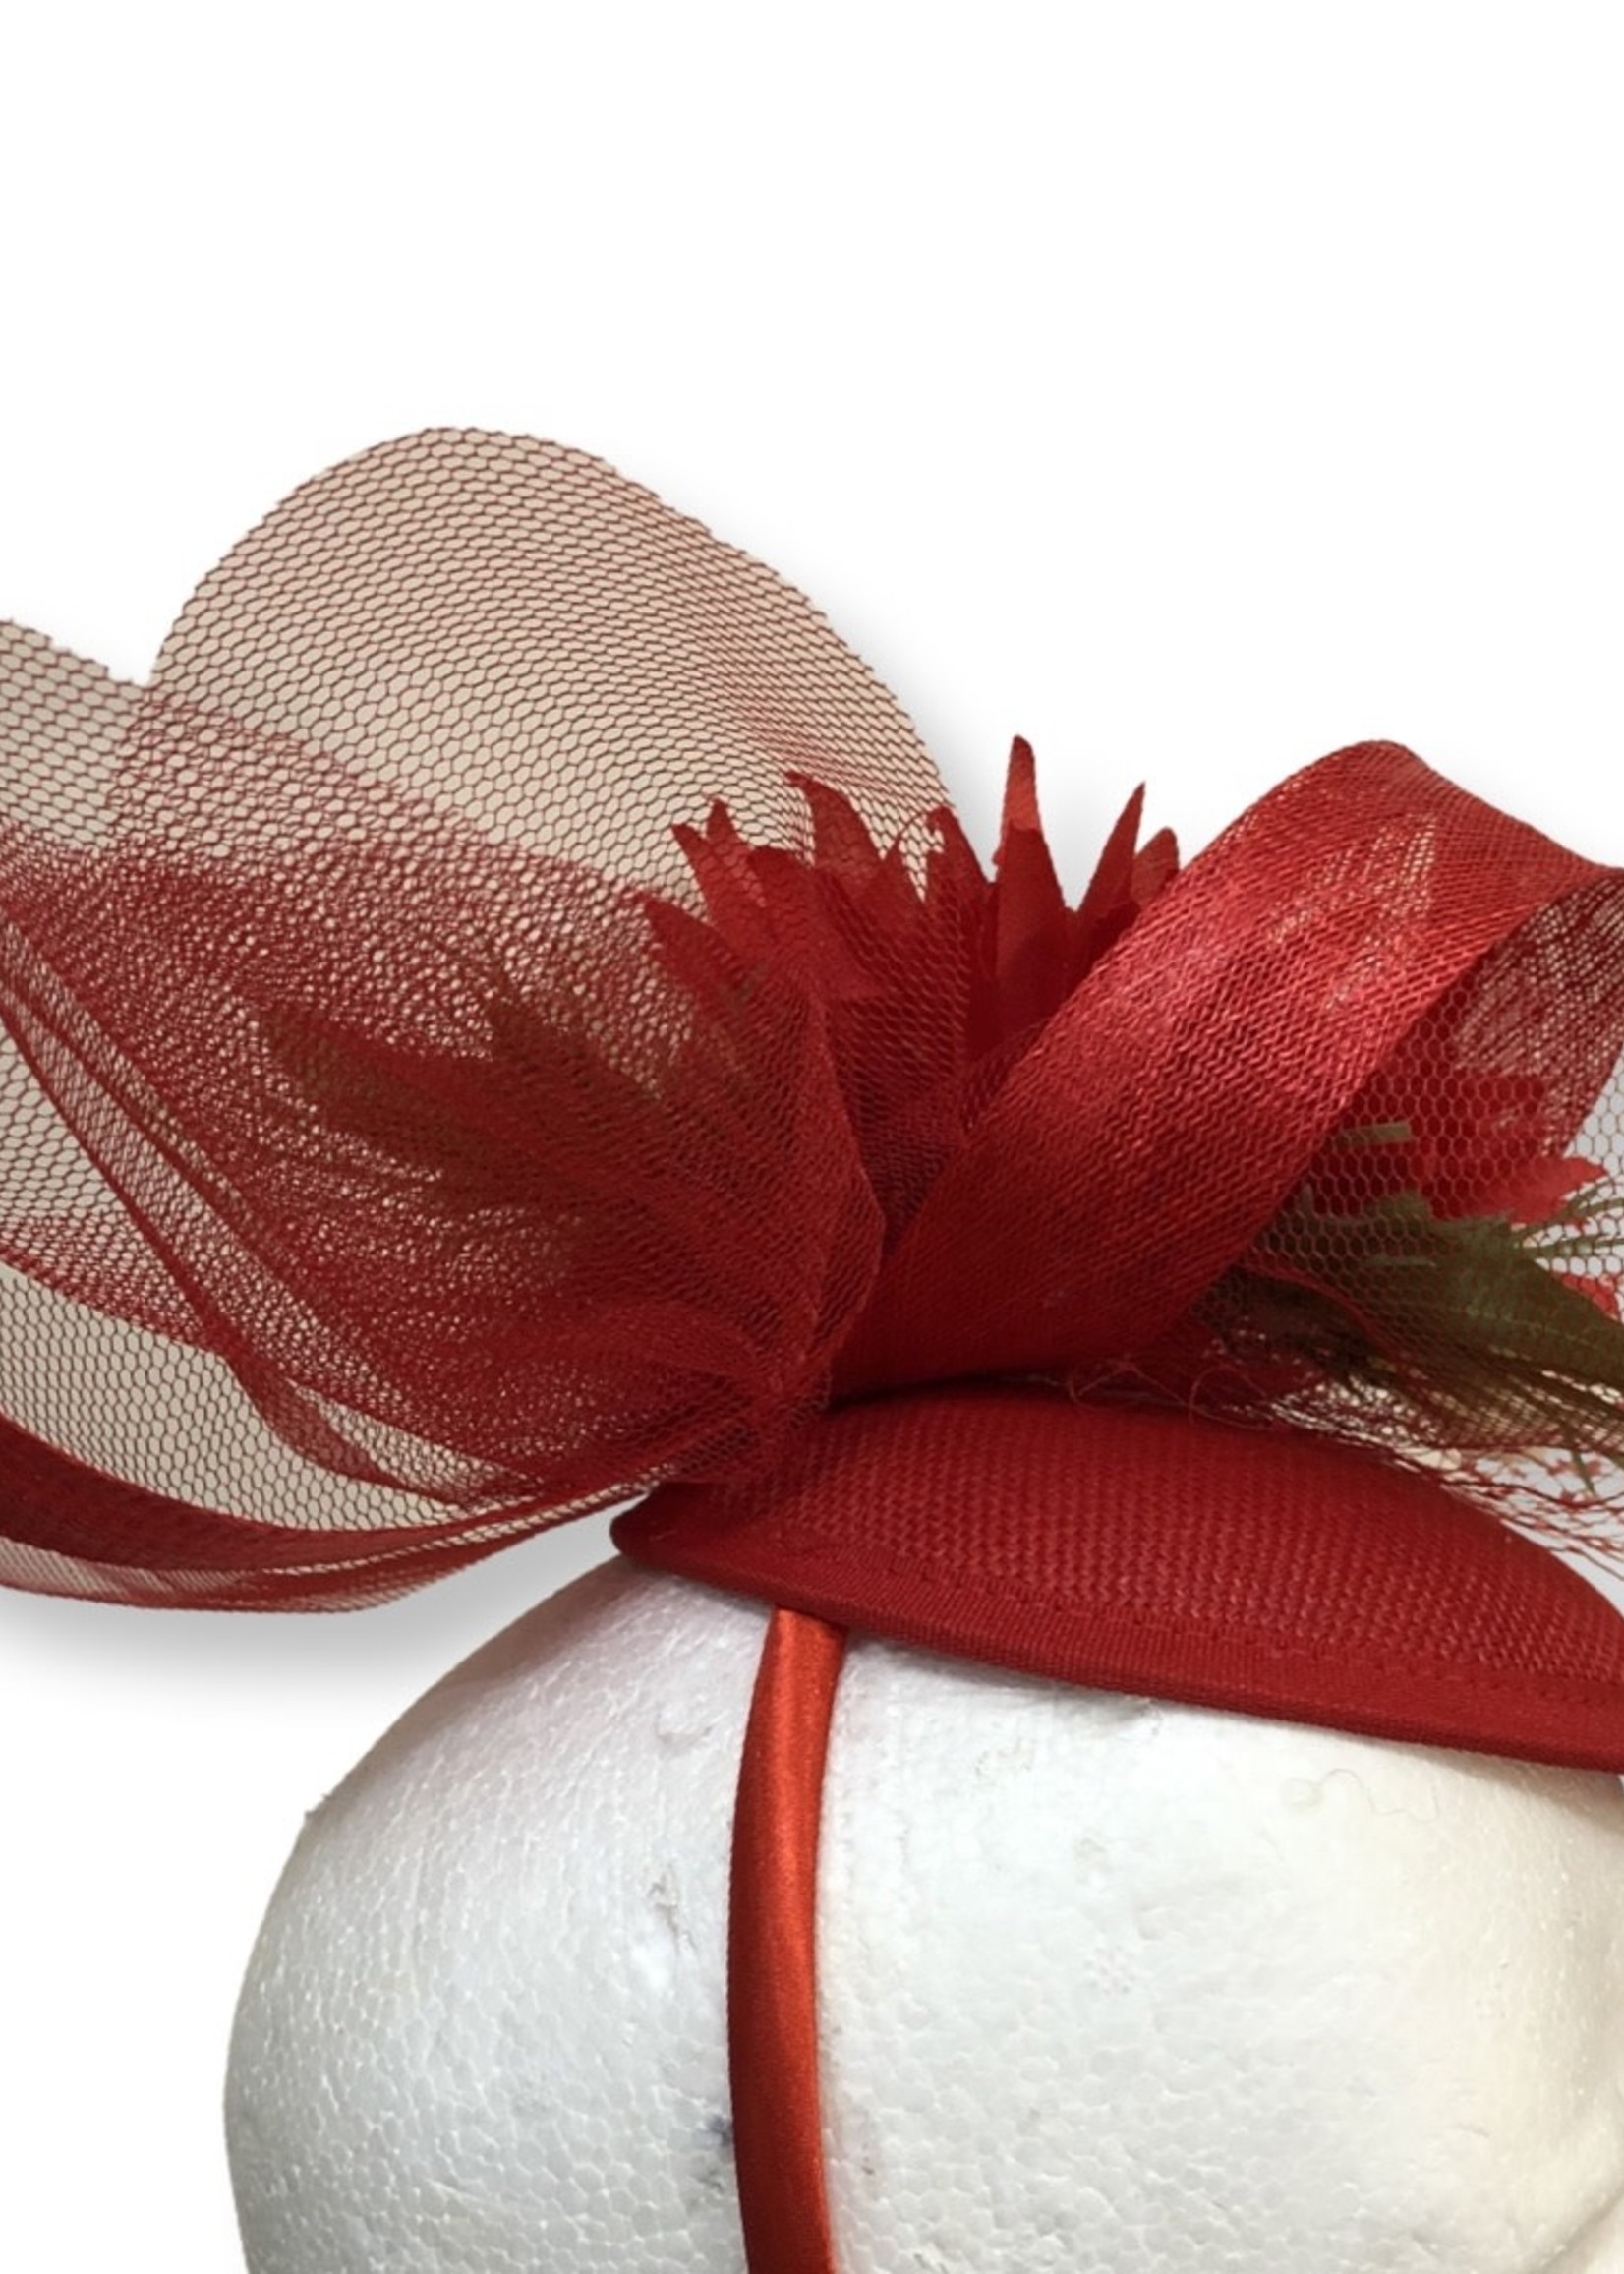 One Plus One Fashion Red & White Floral Headband Fascinator